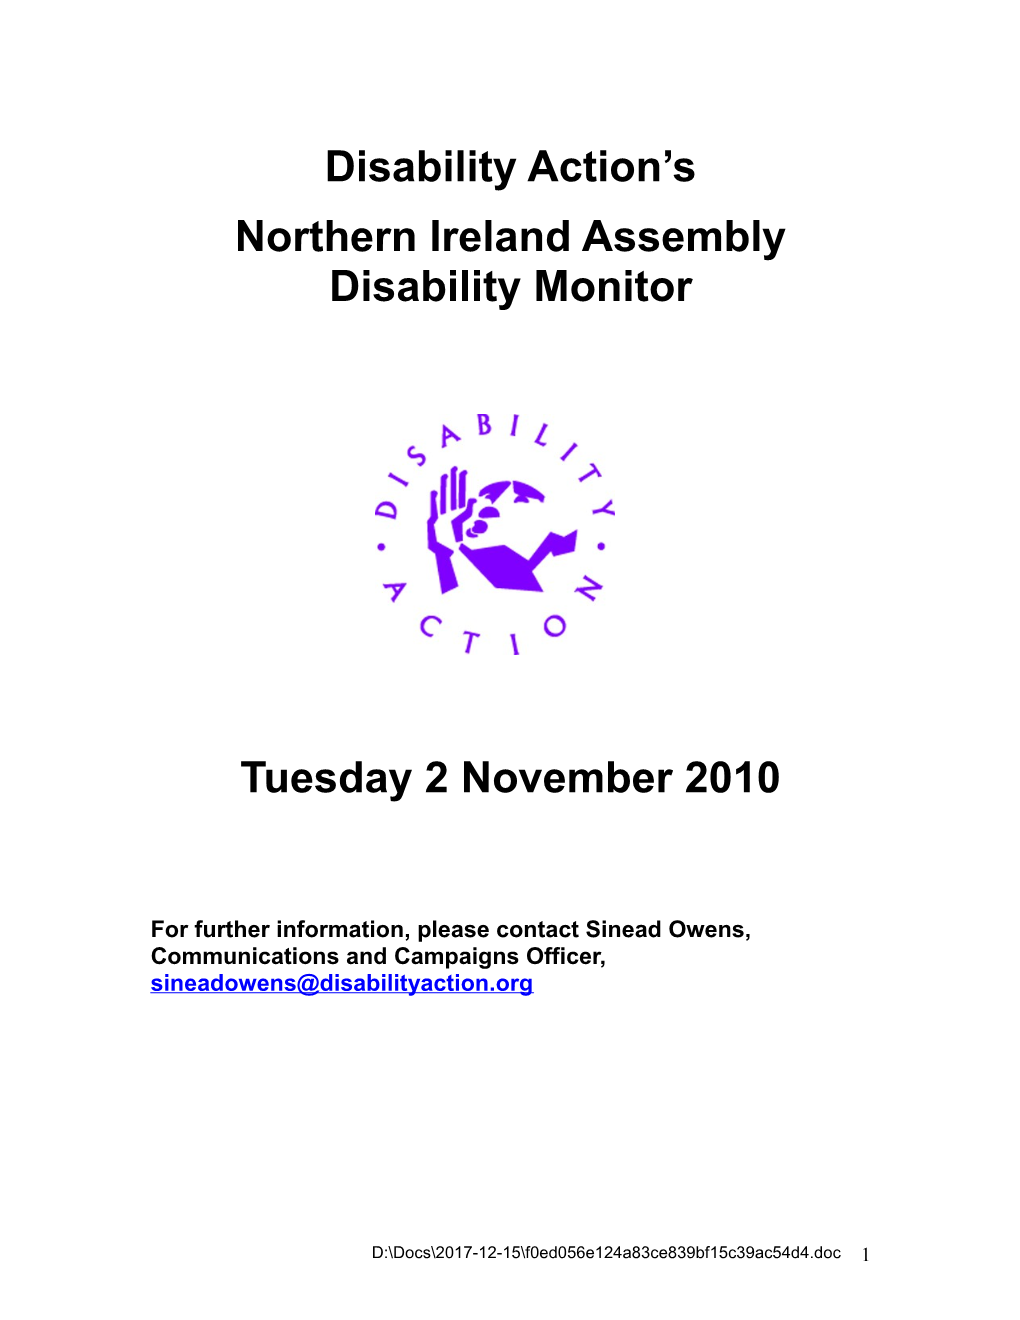 Northern Ireland Assembly Disability Monitor